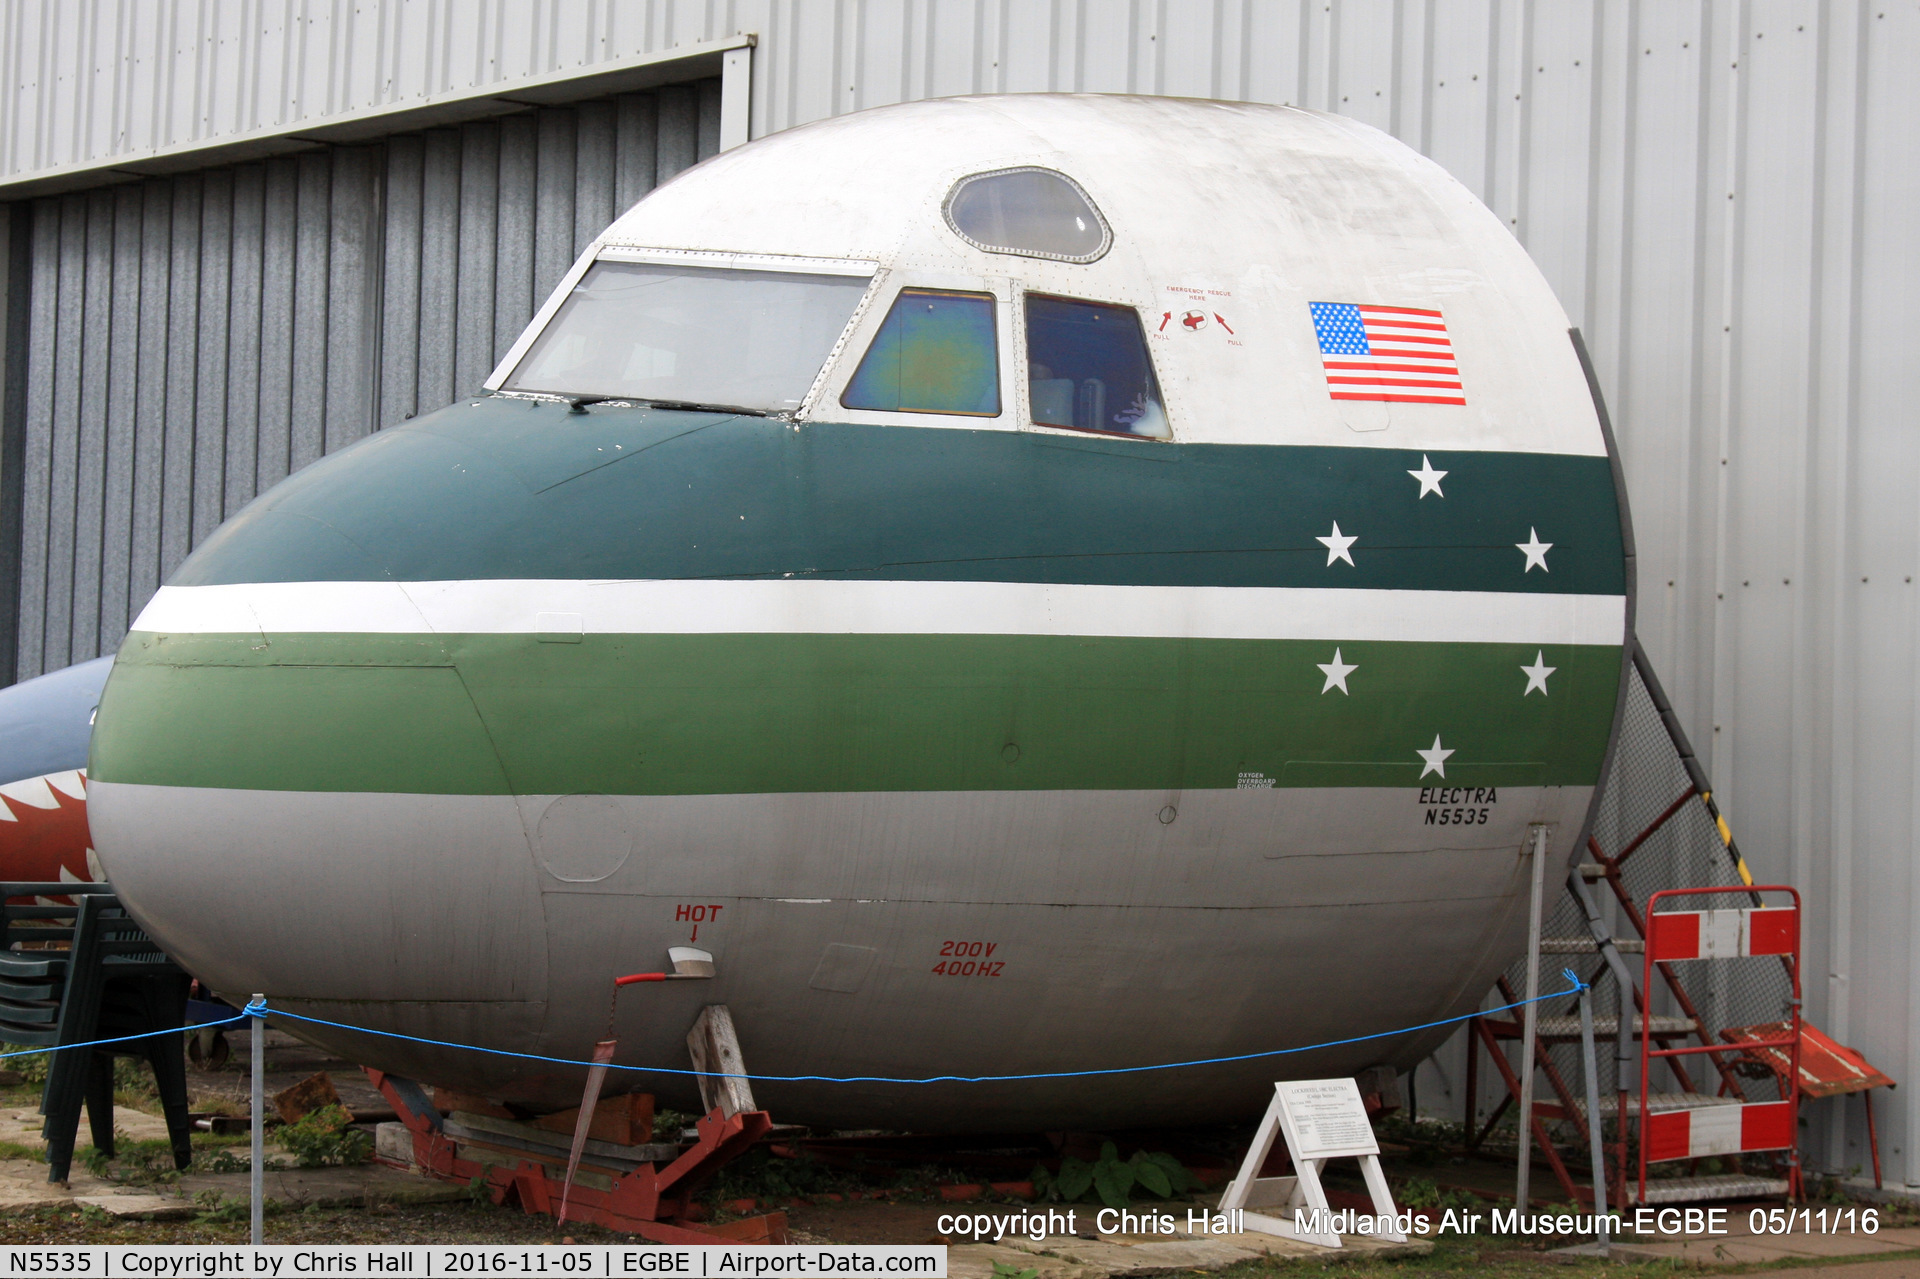 N5535, 1959 Lockheed L-188A(F) Electra C/N 1068, preserved at the Midland Air Museum